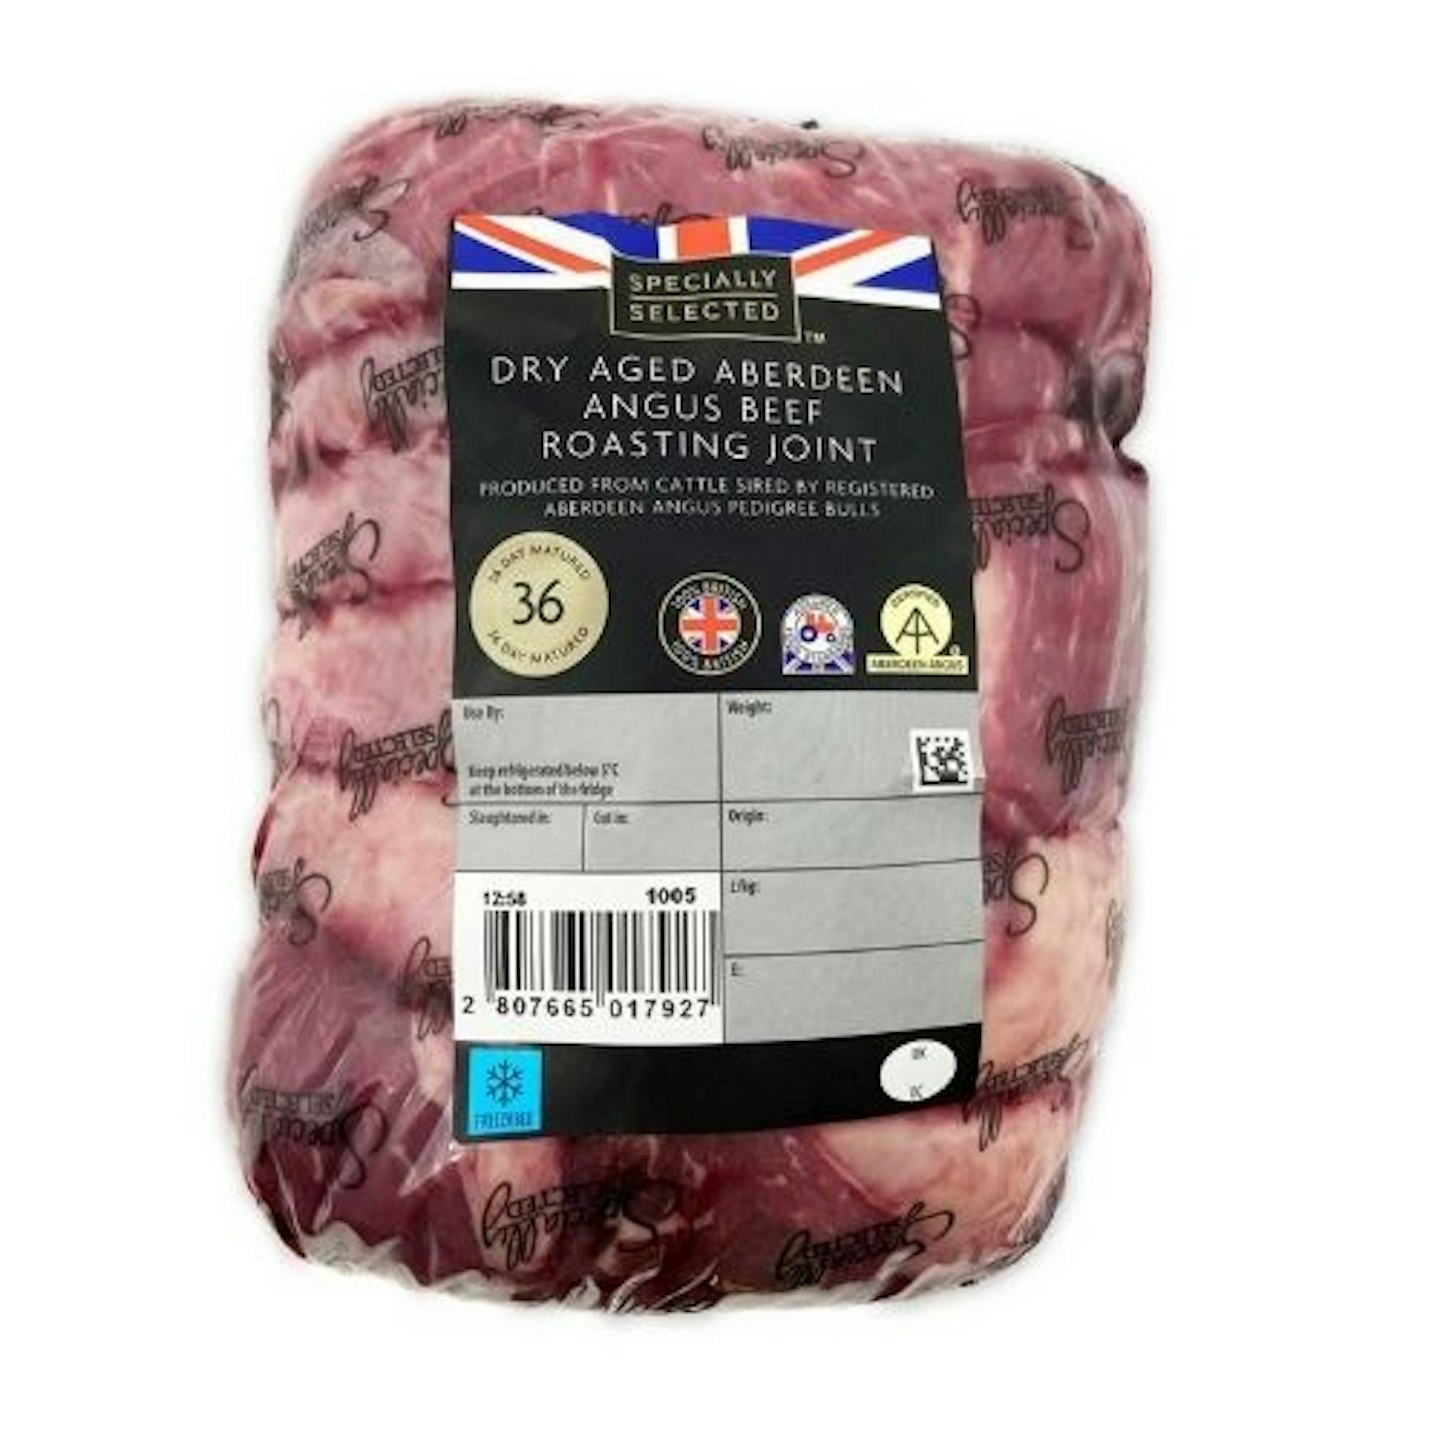 Specially Selected Dry Aged Aberdeen Angus Beef Roasting Joint